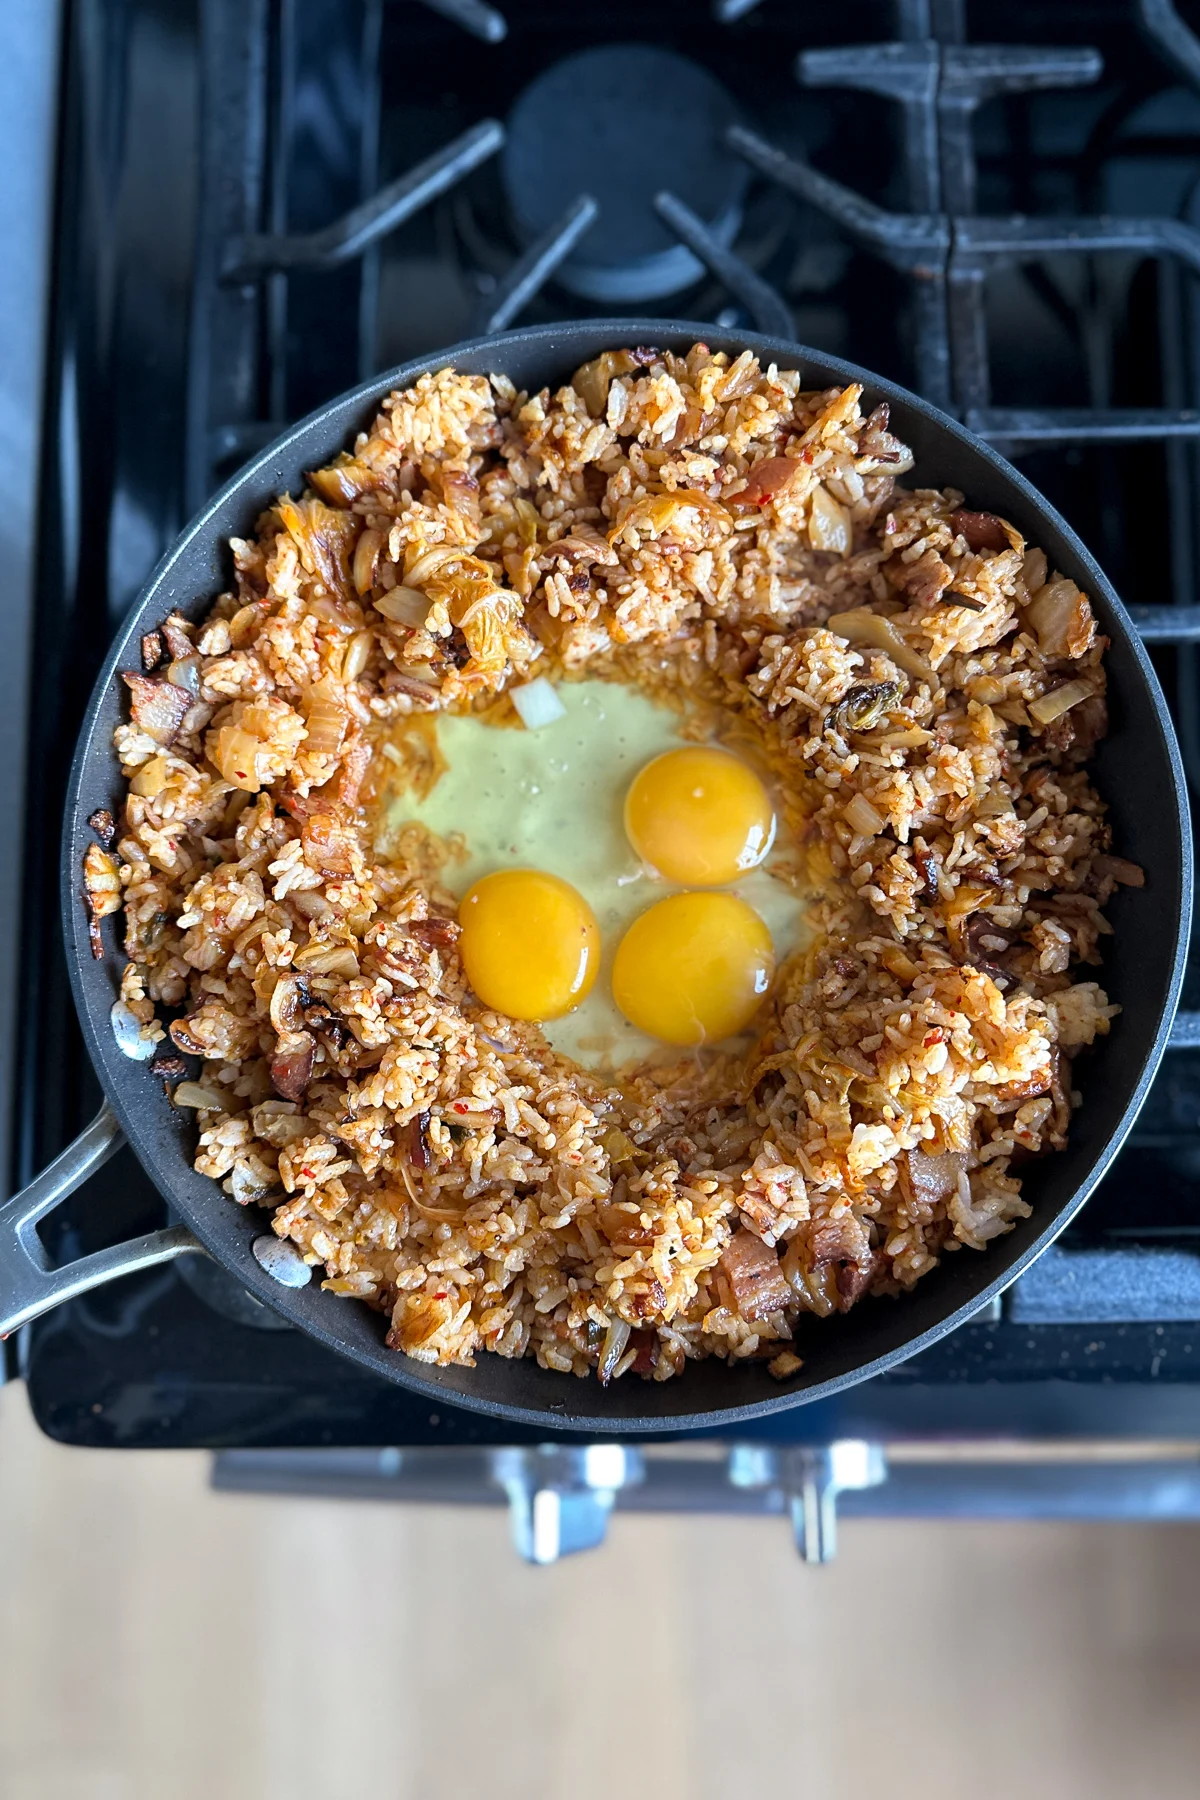 Adding the eggs to the pan, to scramble for kimchi fried rice.